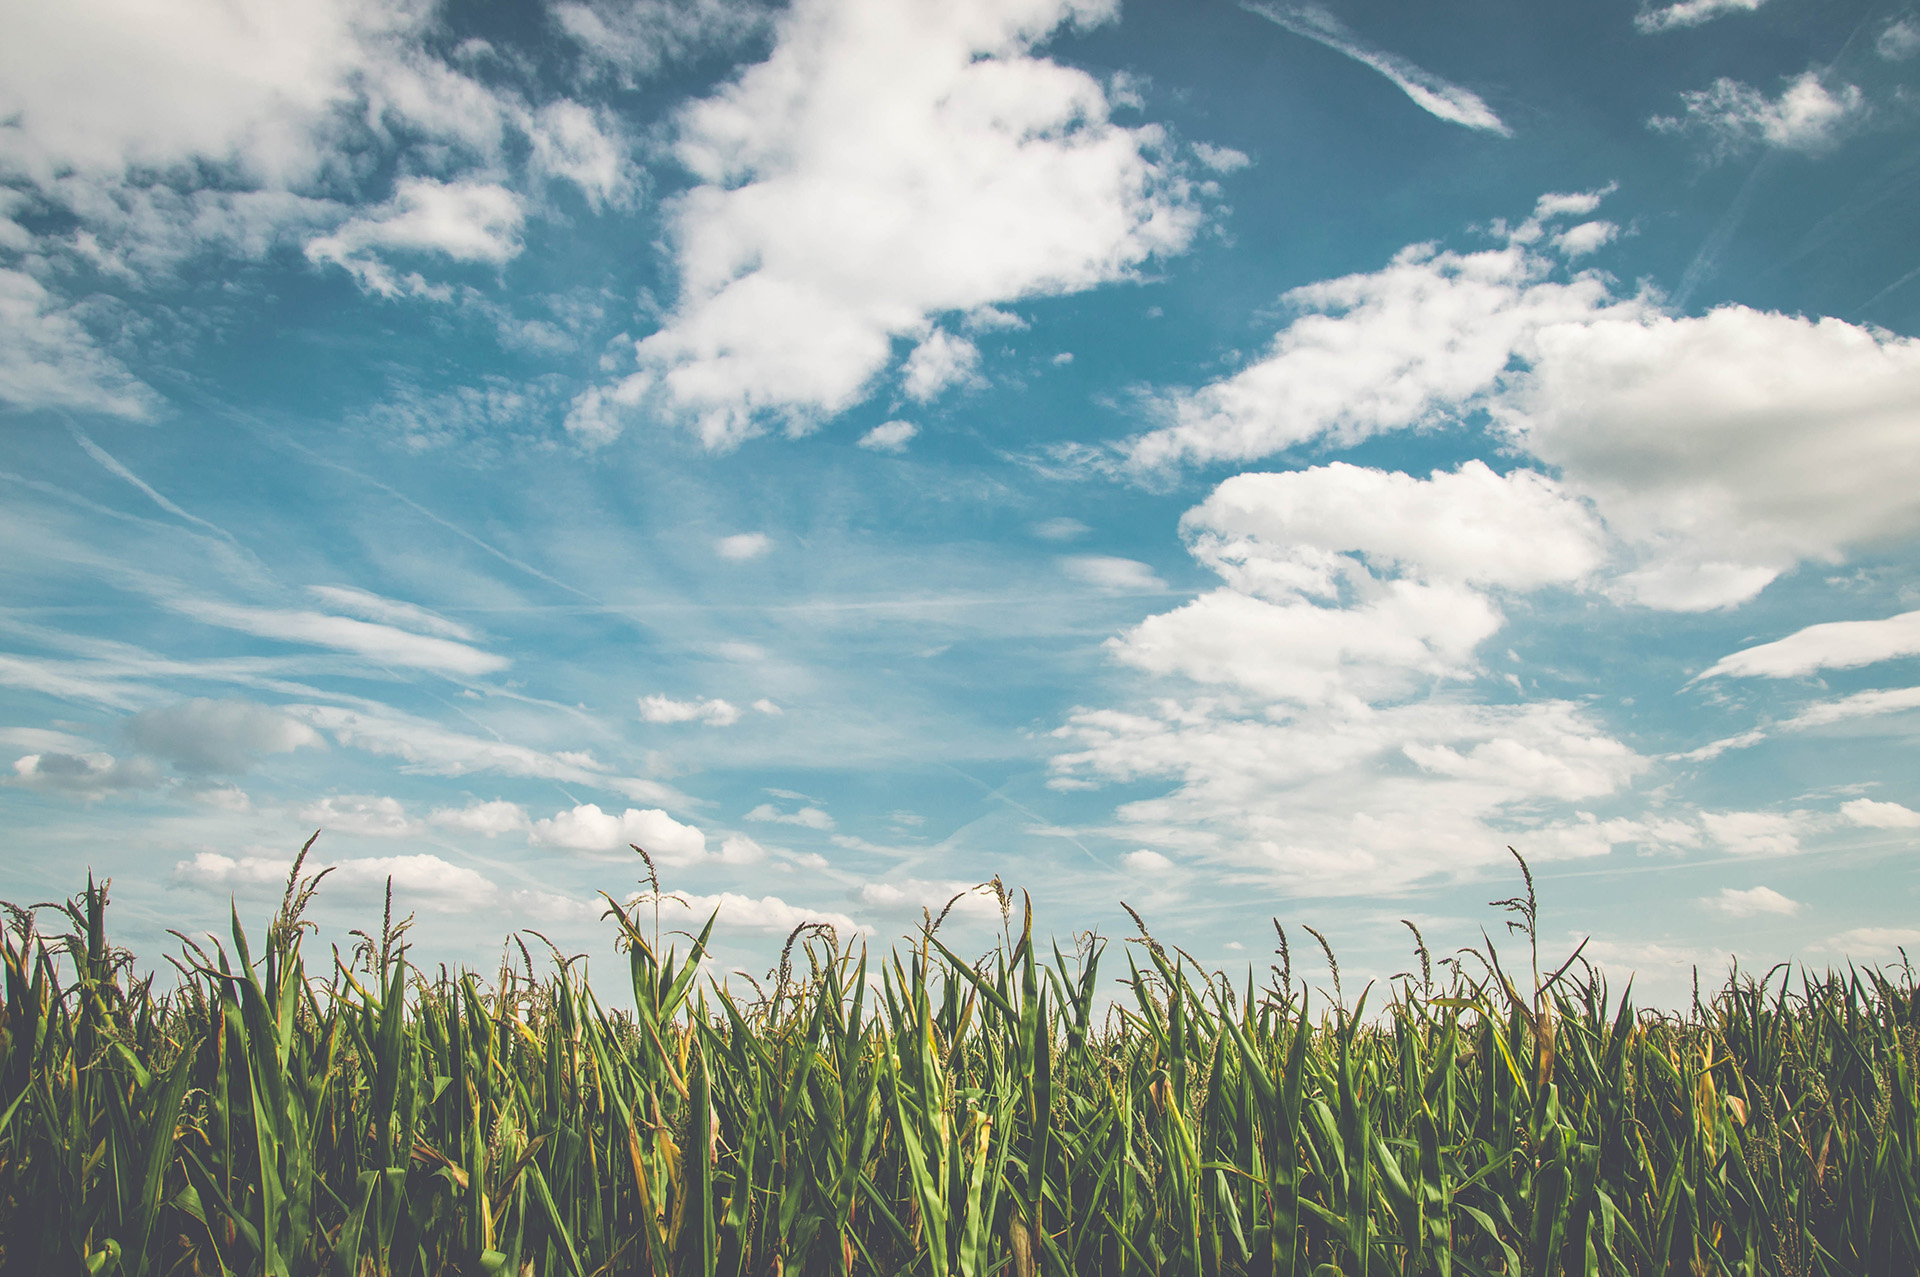 Grass sprouting beneath a bright blue sky with clear clouds   